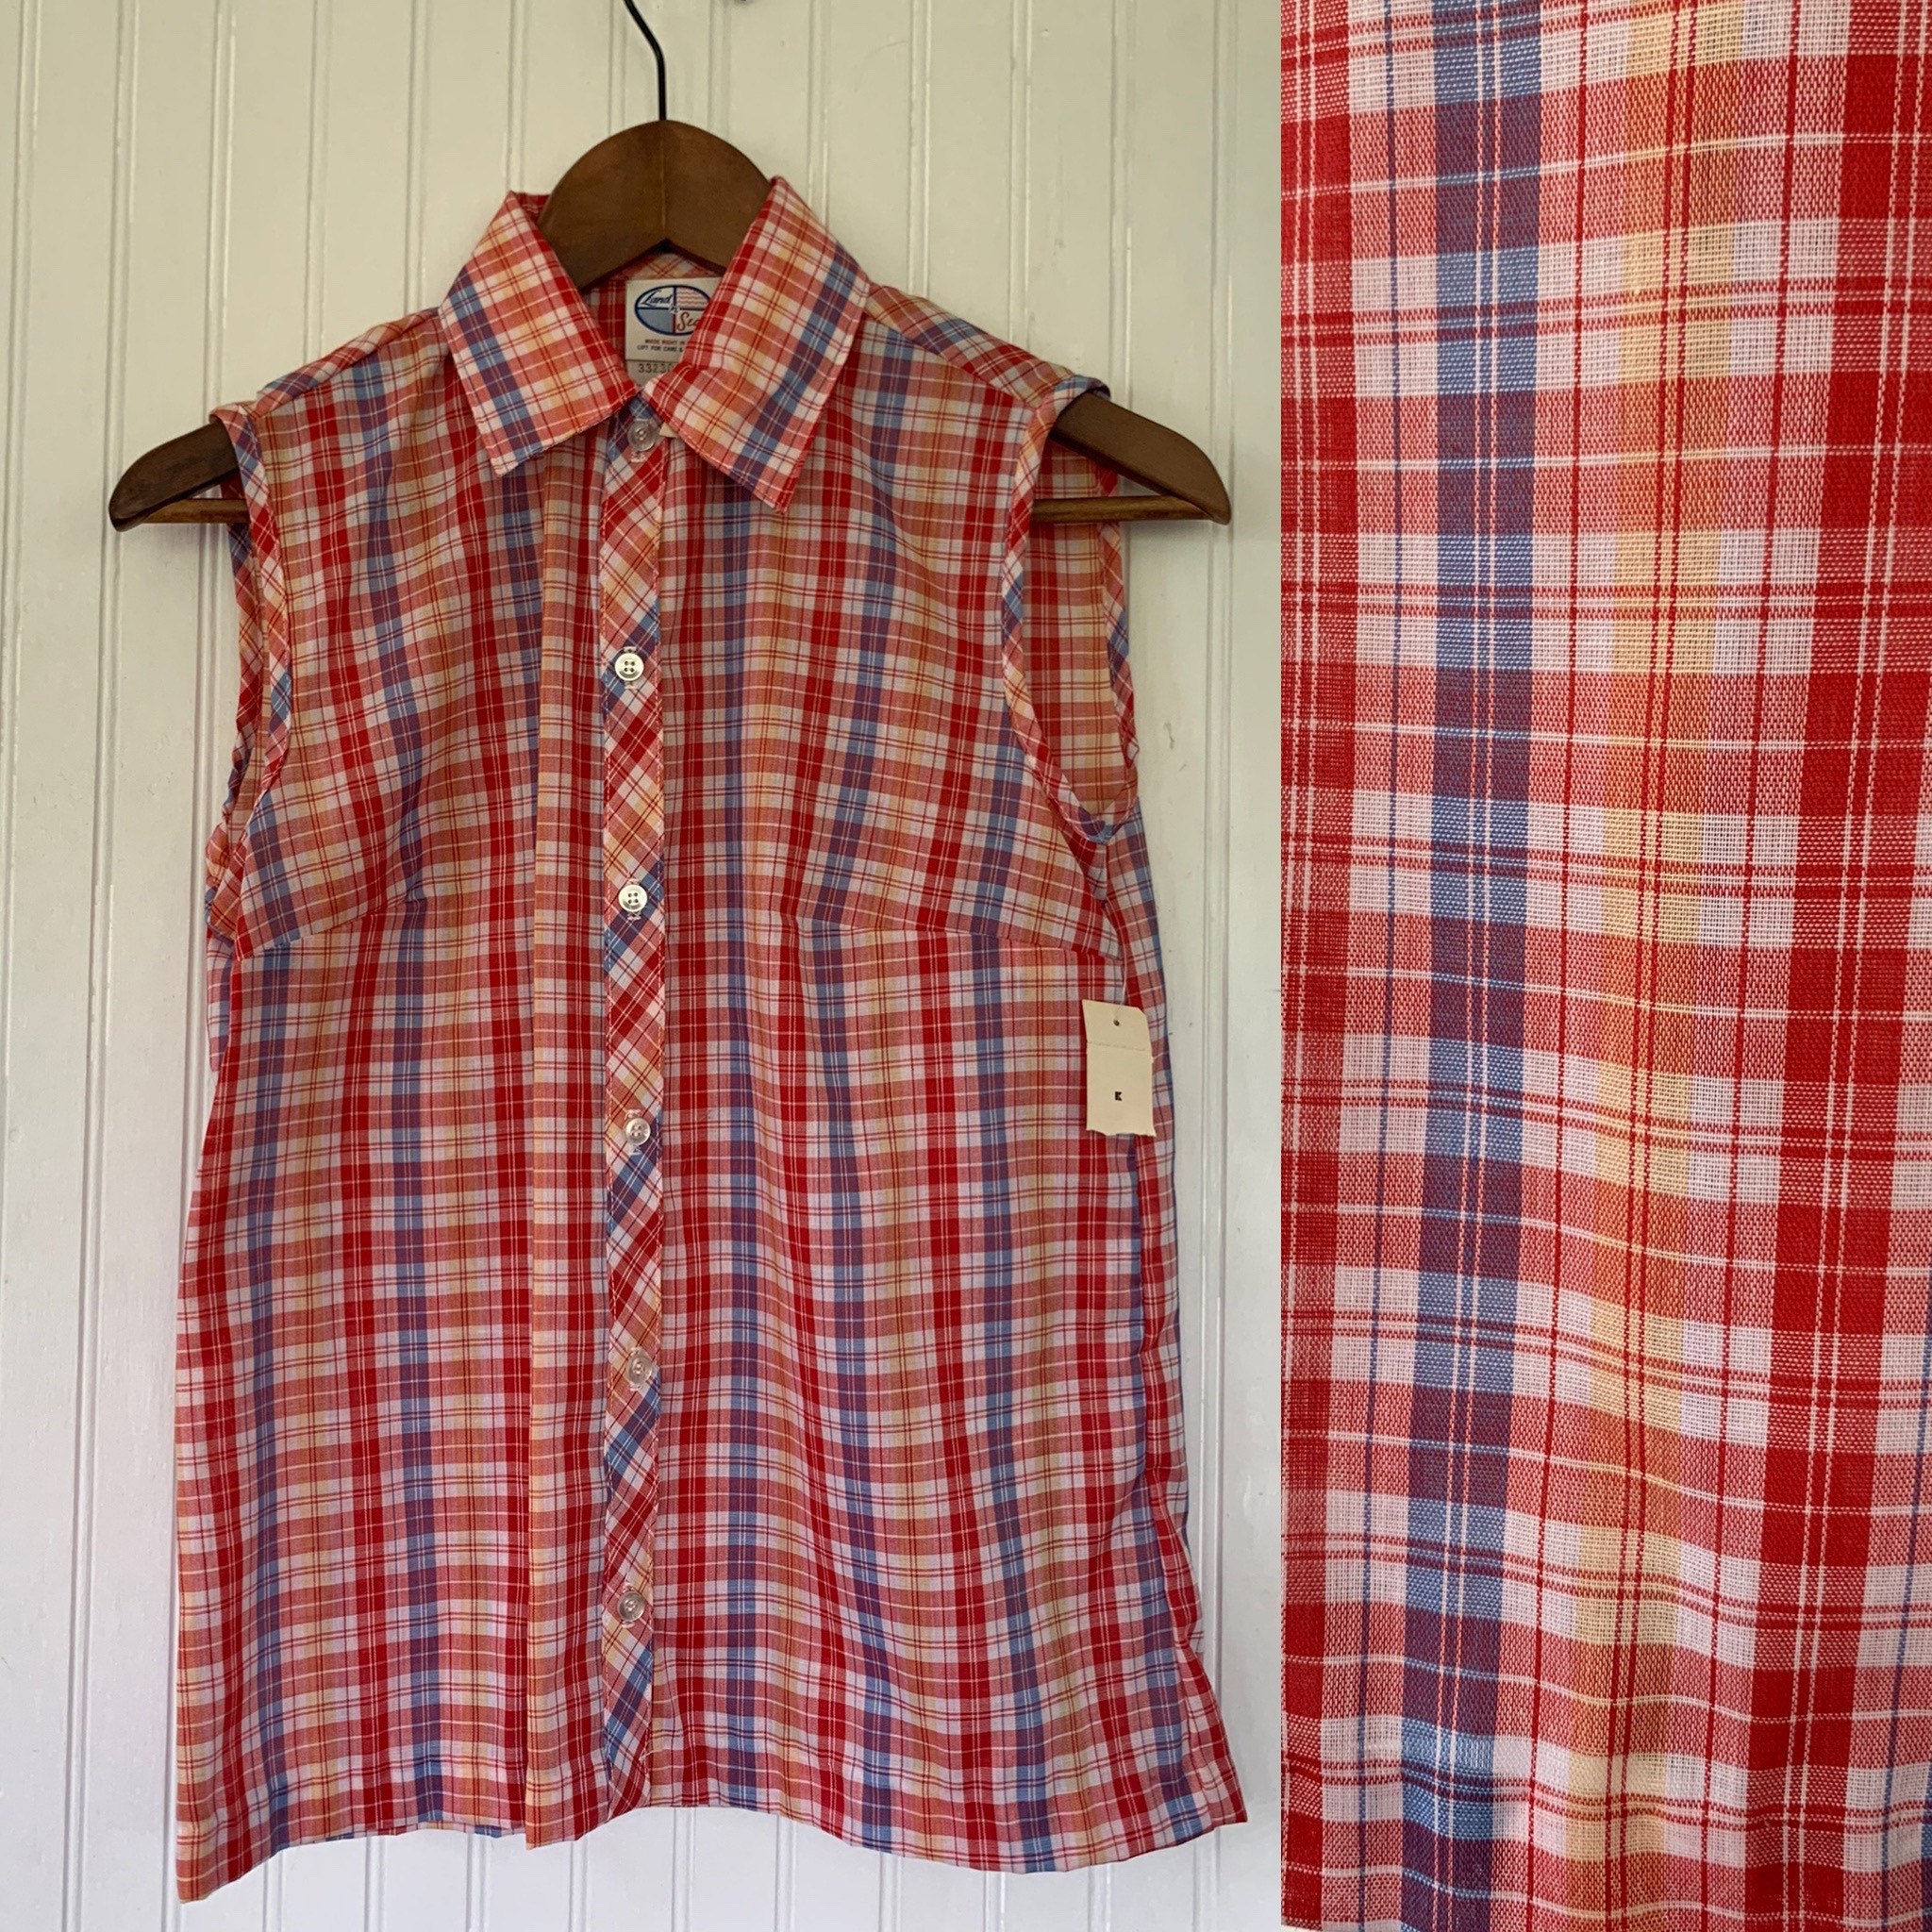 NWT 80s Vintage Plaid Sleeveless Top Size XS Small Red White Blue ...